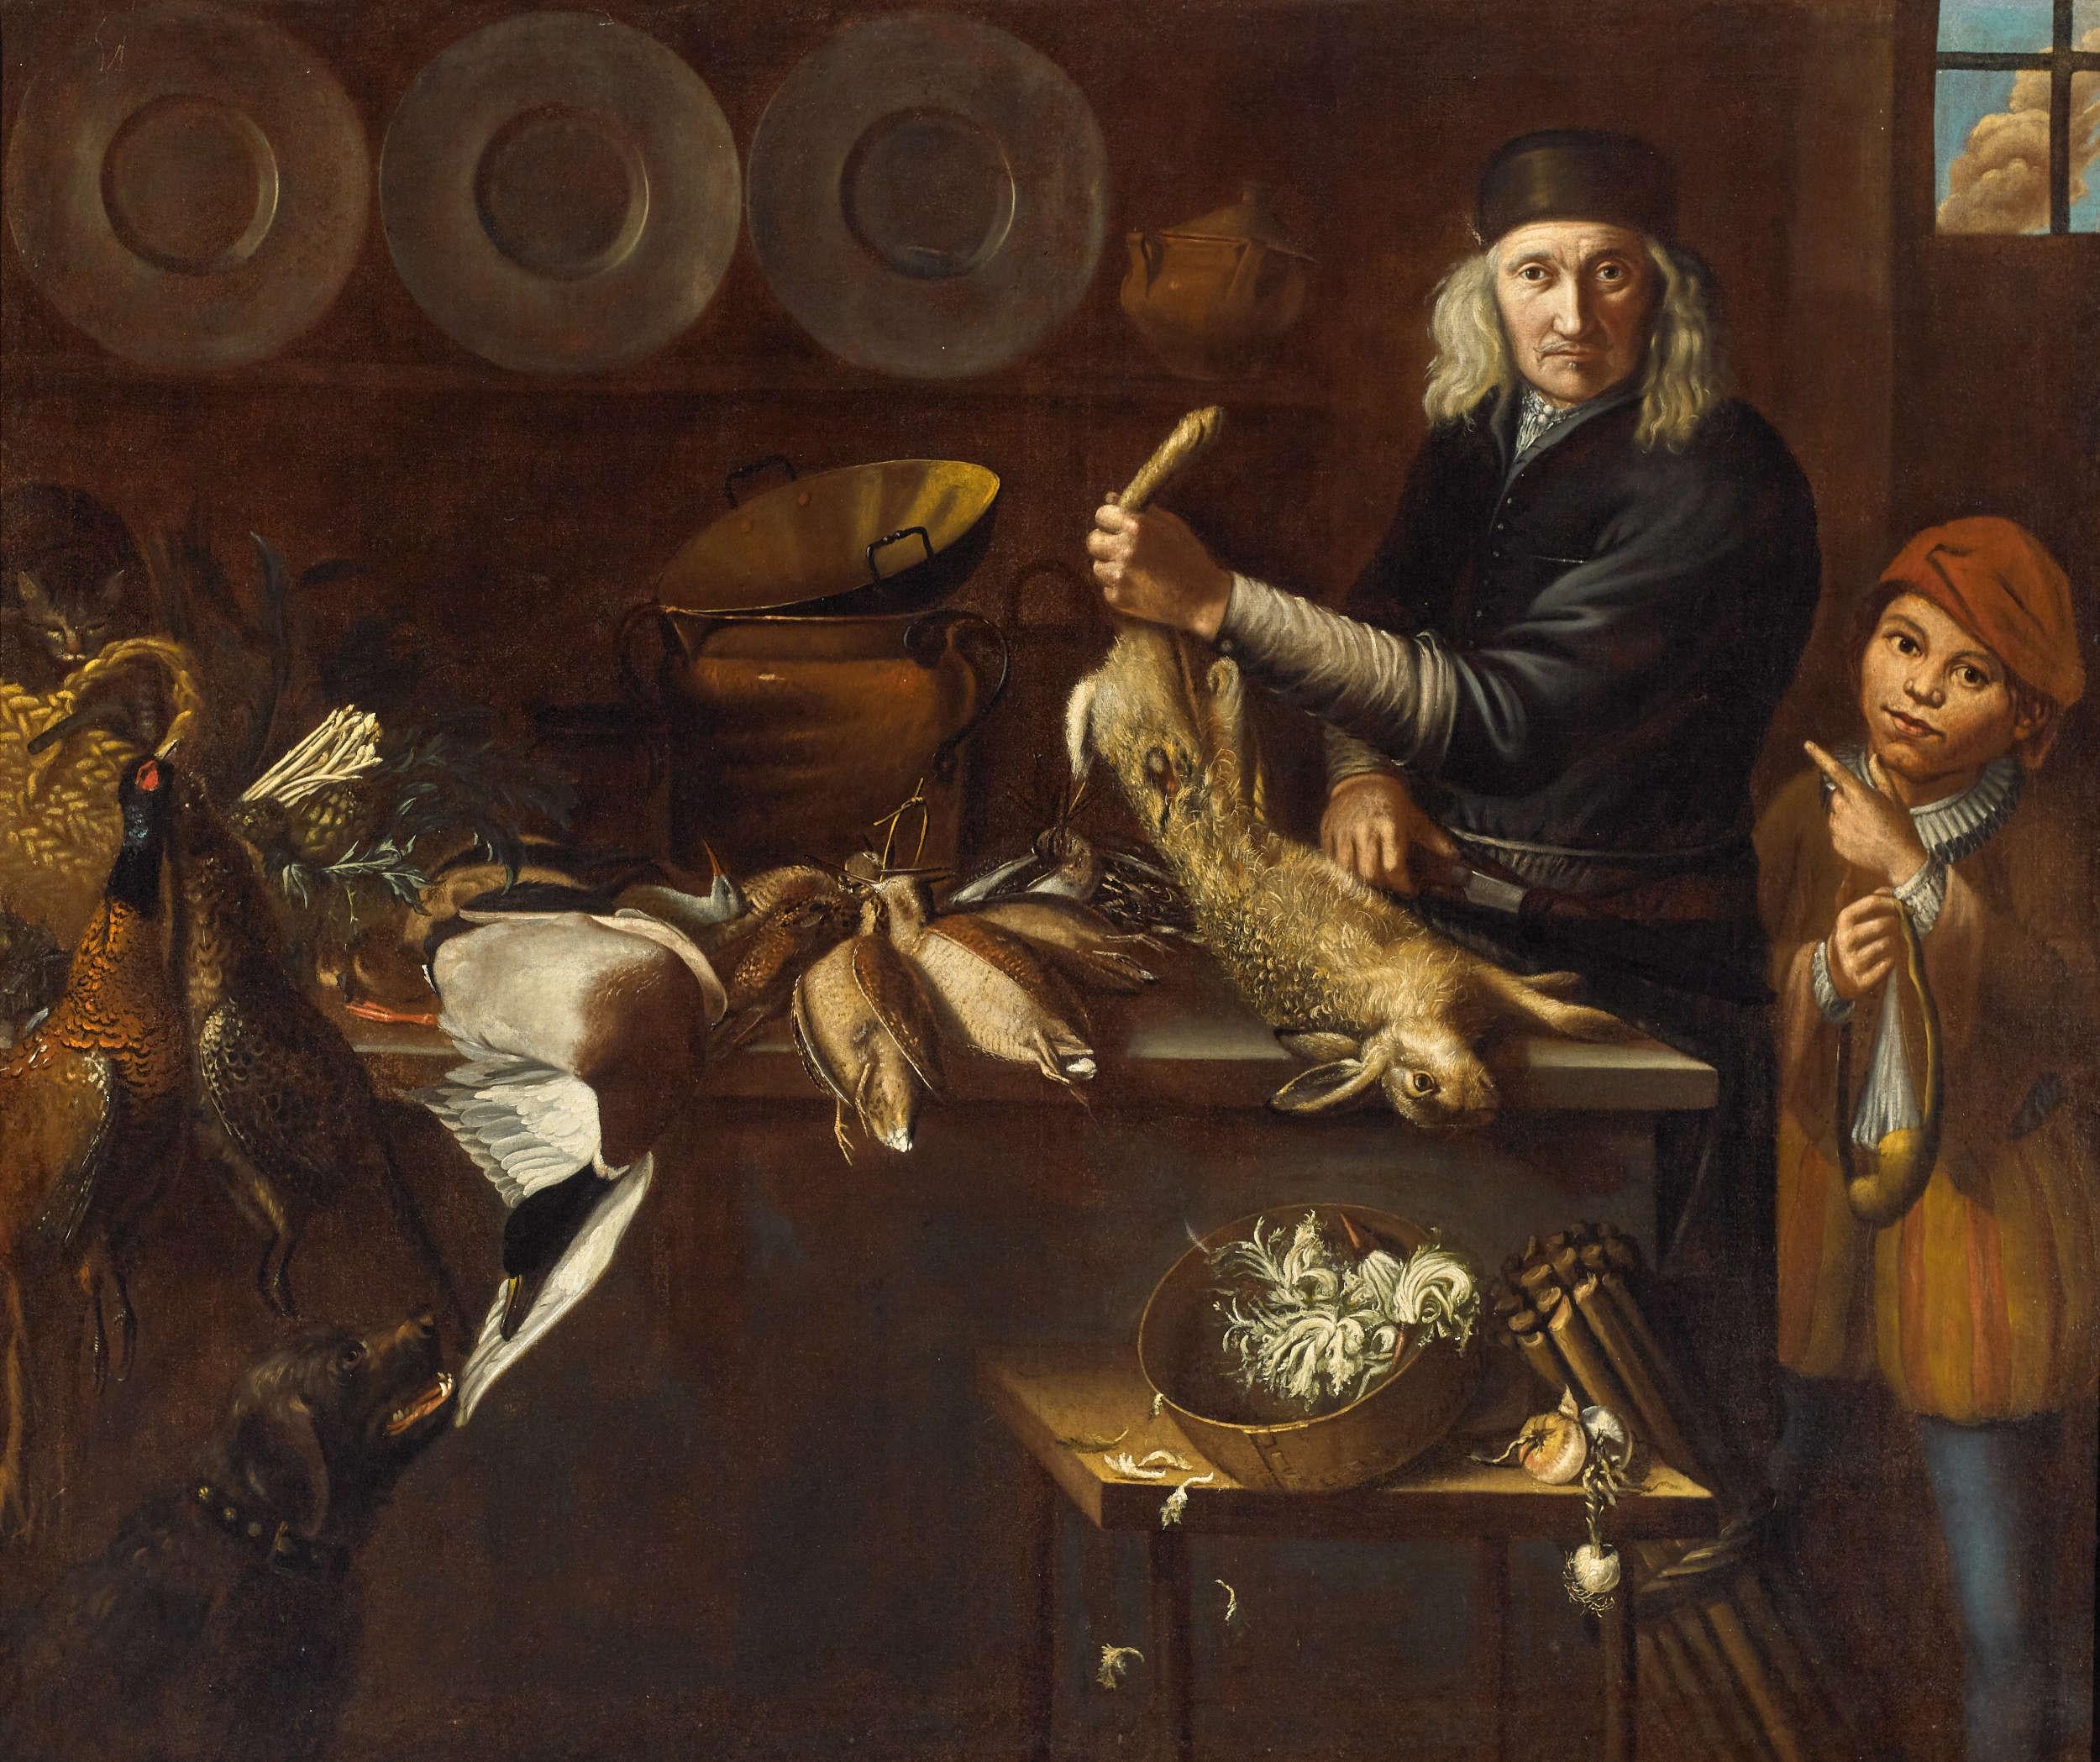 Kitchen interior, oil painting on canvas, northern Italy, 17th century

Two characters, still life with rich game and vegetables, tableware, a dog and a cat. 

Northern Italy,  17th century

dimensions: 155 x 185 cm
 174 x 205 cm (with frame)


In